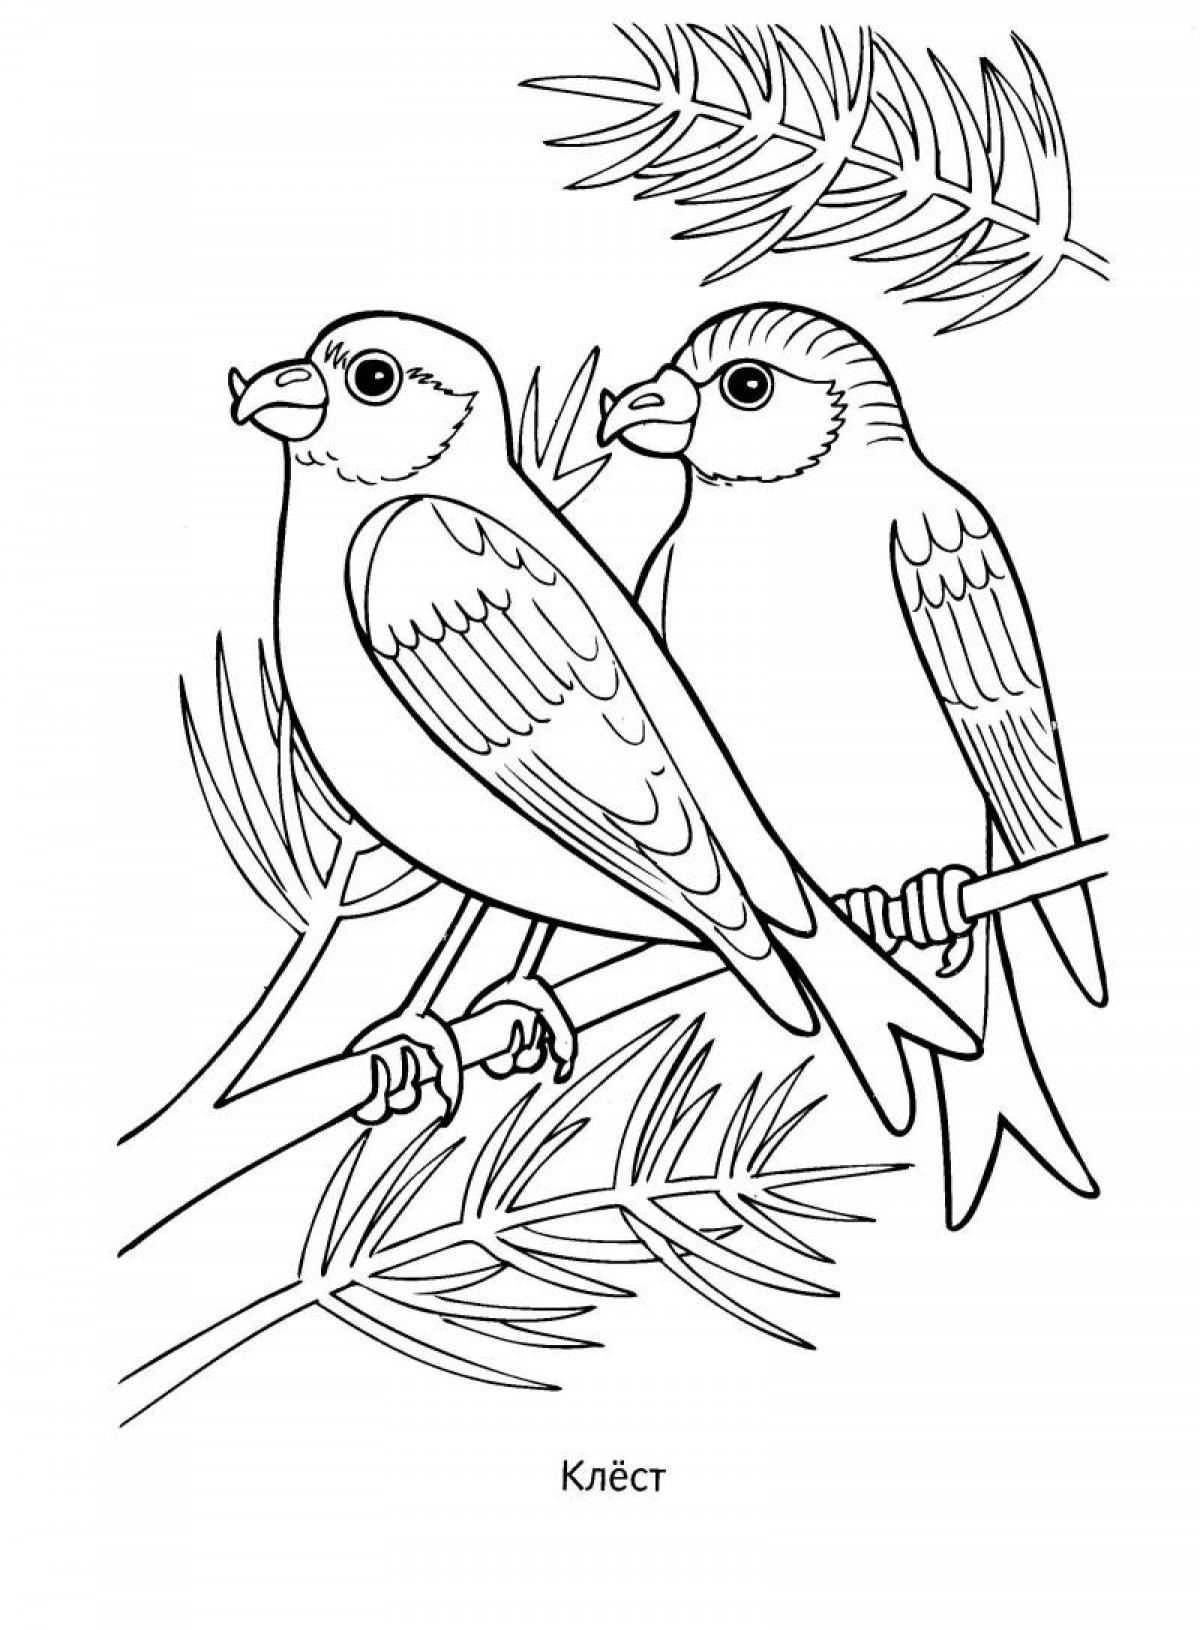 Colorful coloring pages of wintering birds for children 4-5 years old